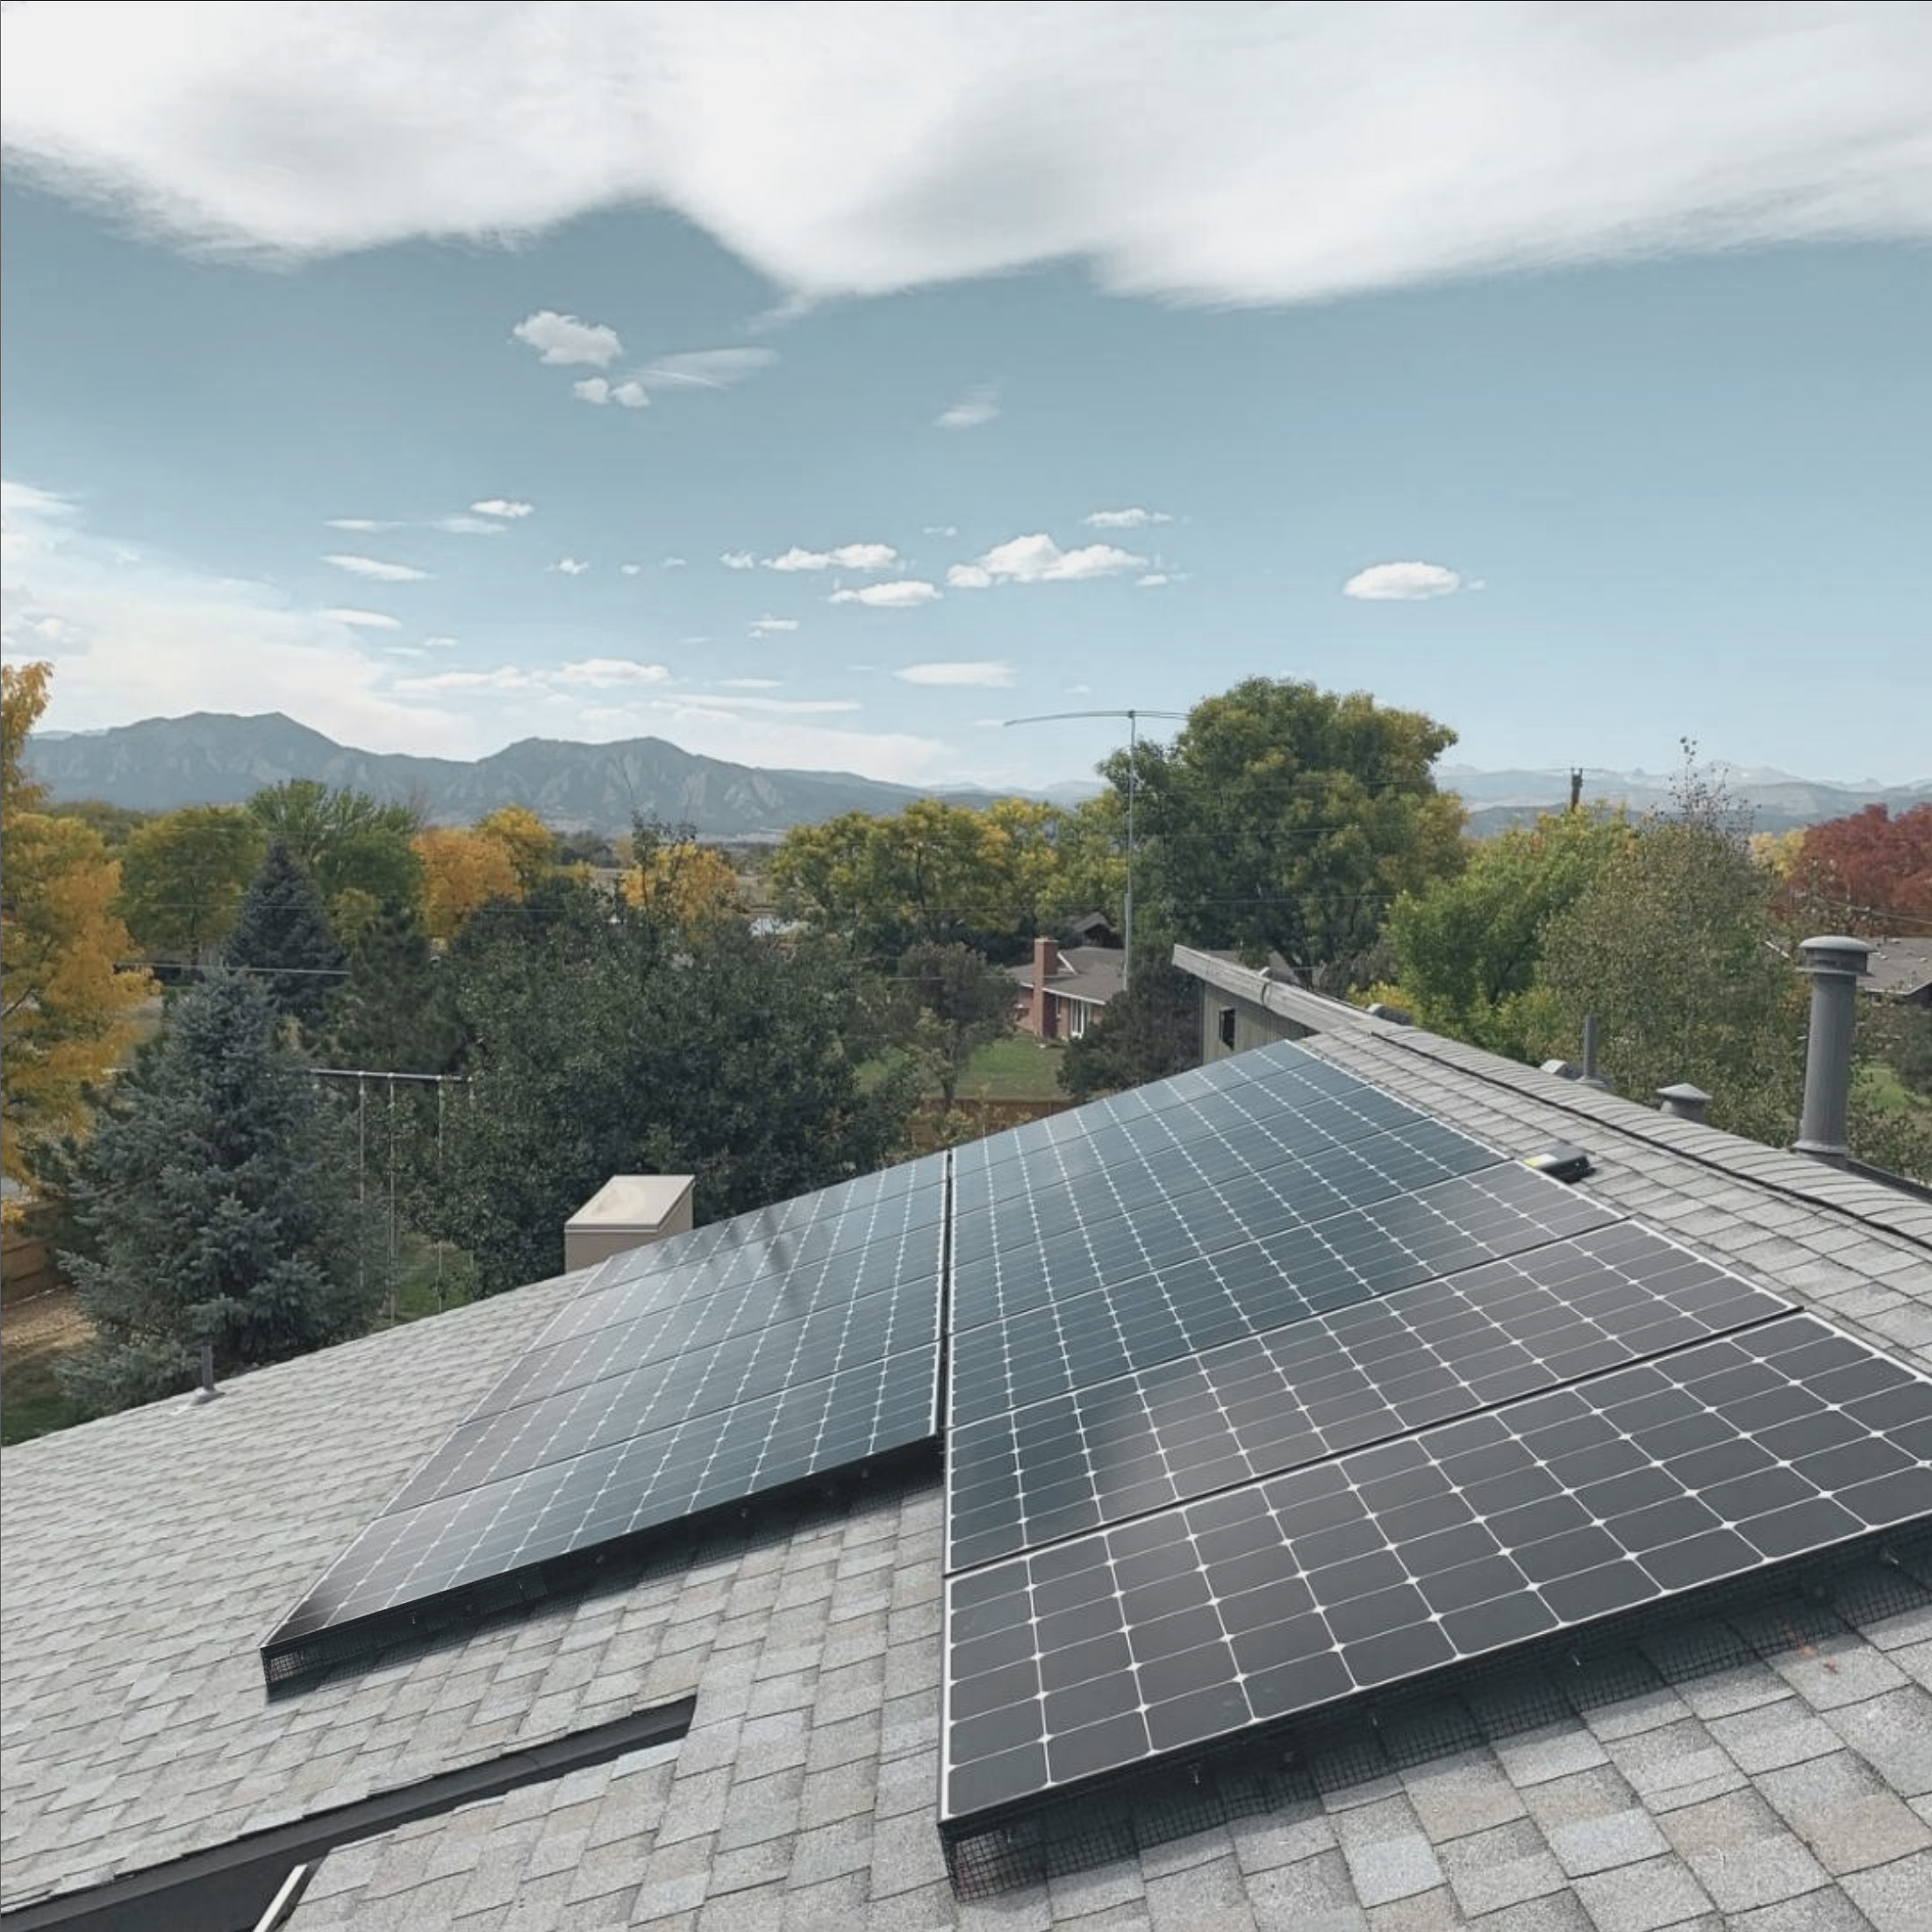 photo of solar panels on roof with flatirons in background